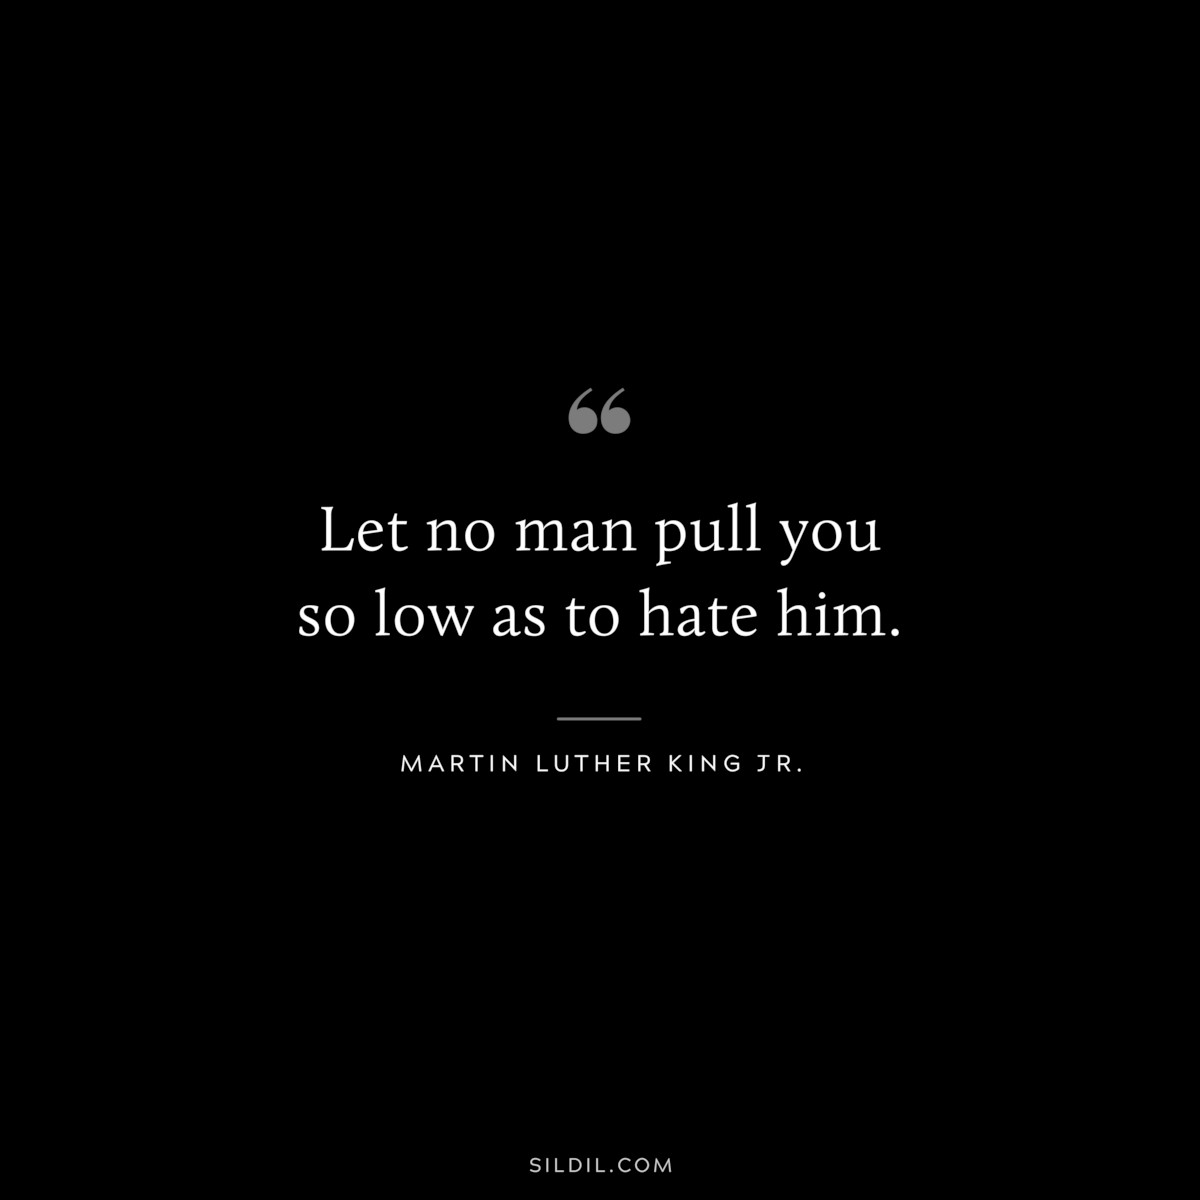 Let no man pull you so low as to hate him. ― Martin Luther King Jr.